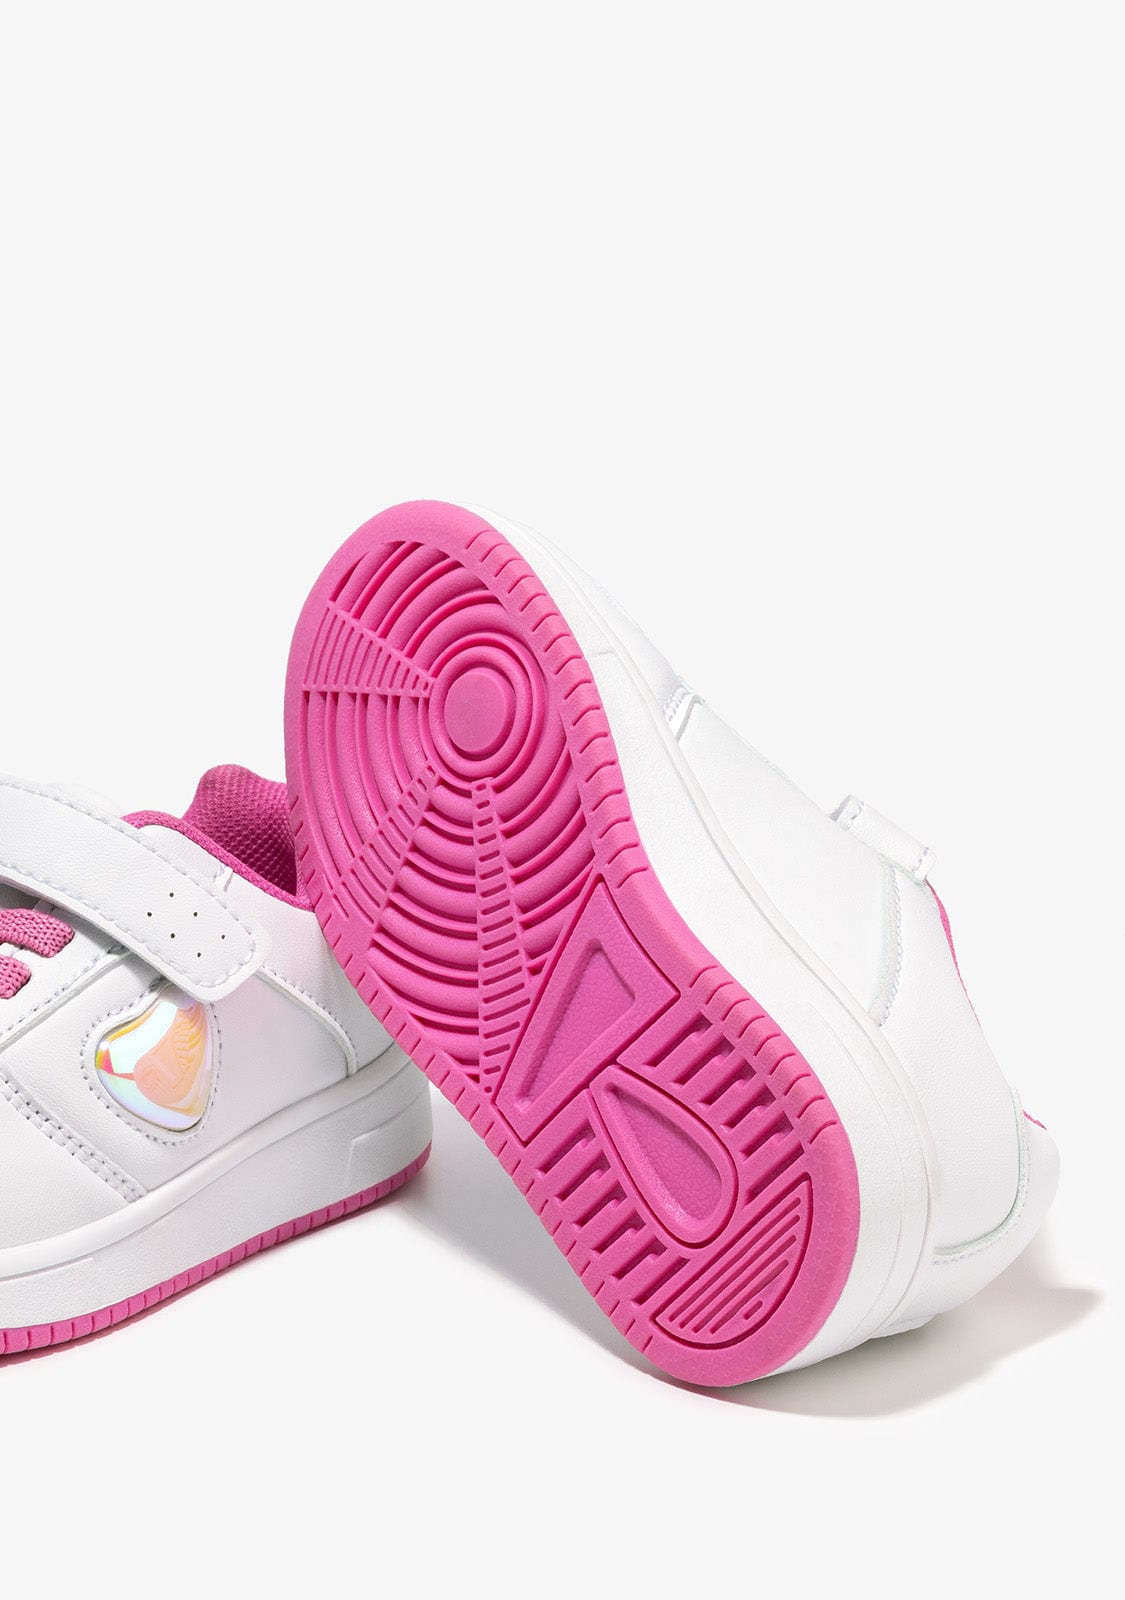 OSITO Shoes Baby's White With Lights Heart Sneakers